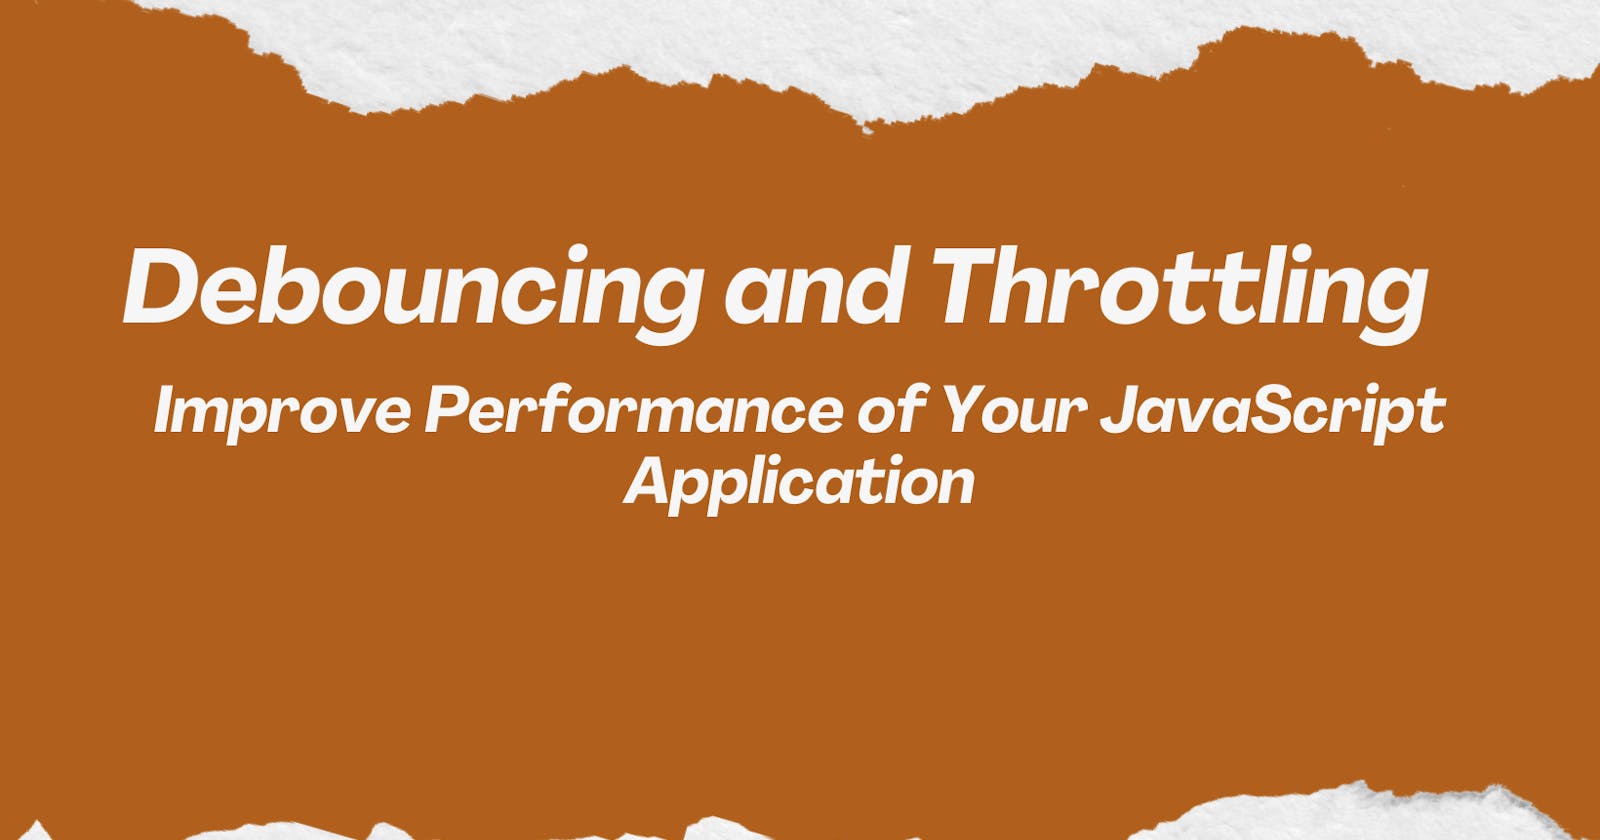 Debouncing and Throttling: Improve Performance of Your JavaScript Application